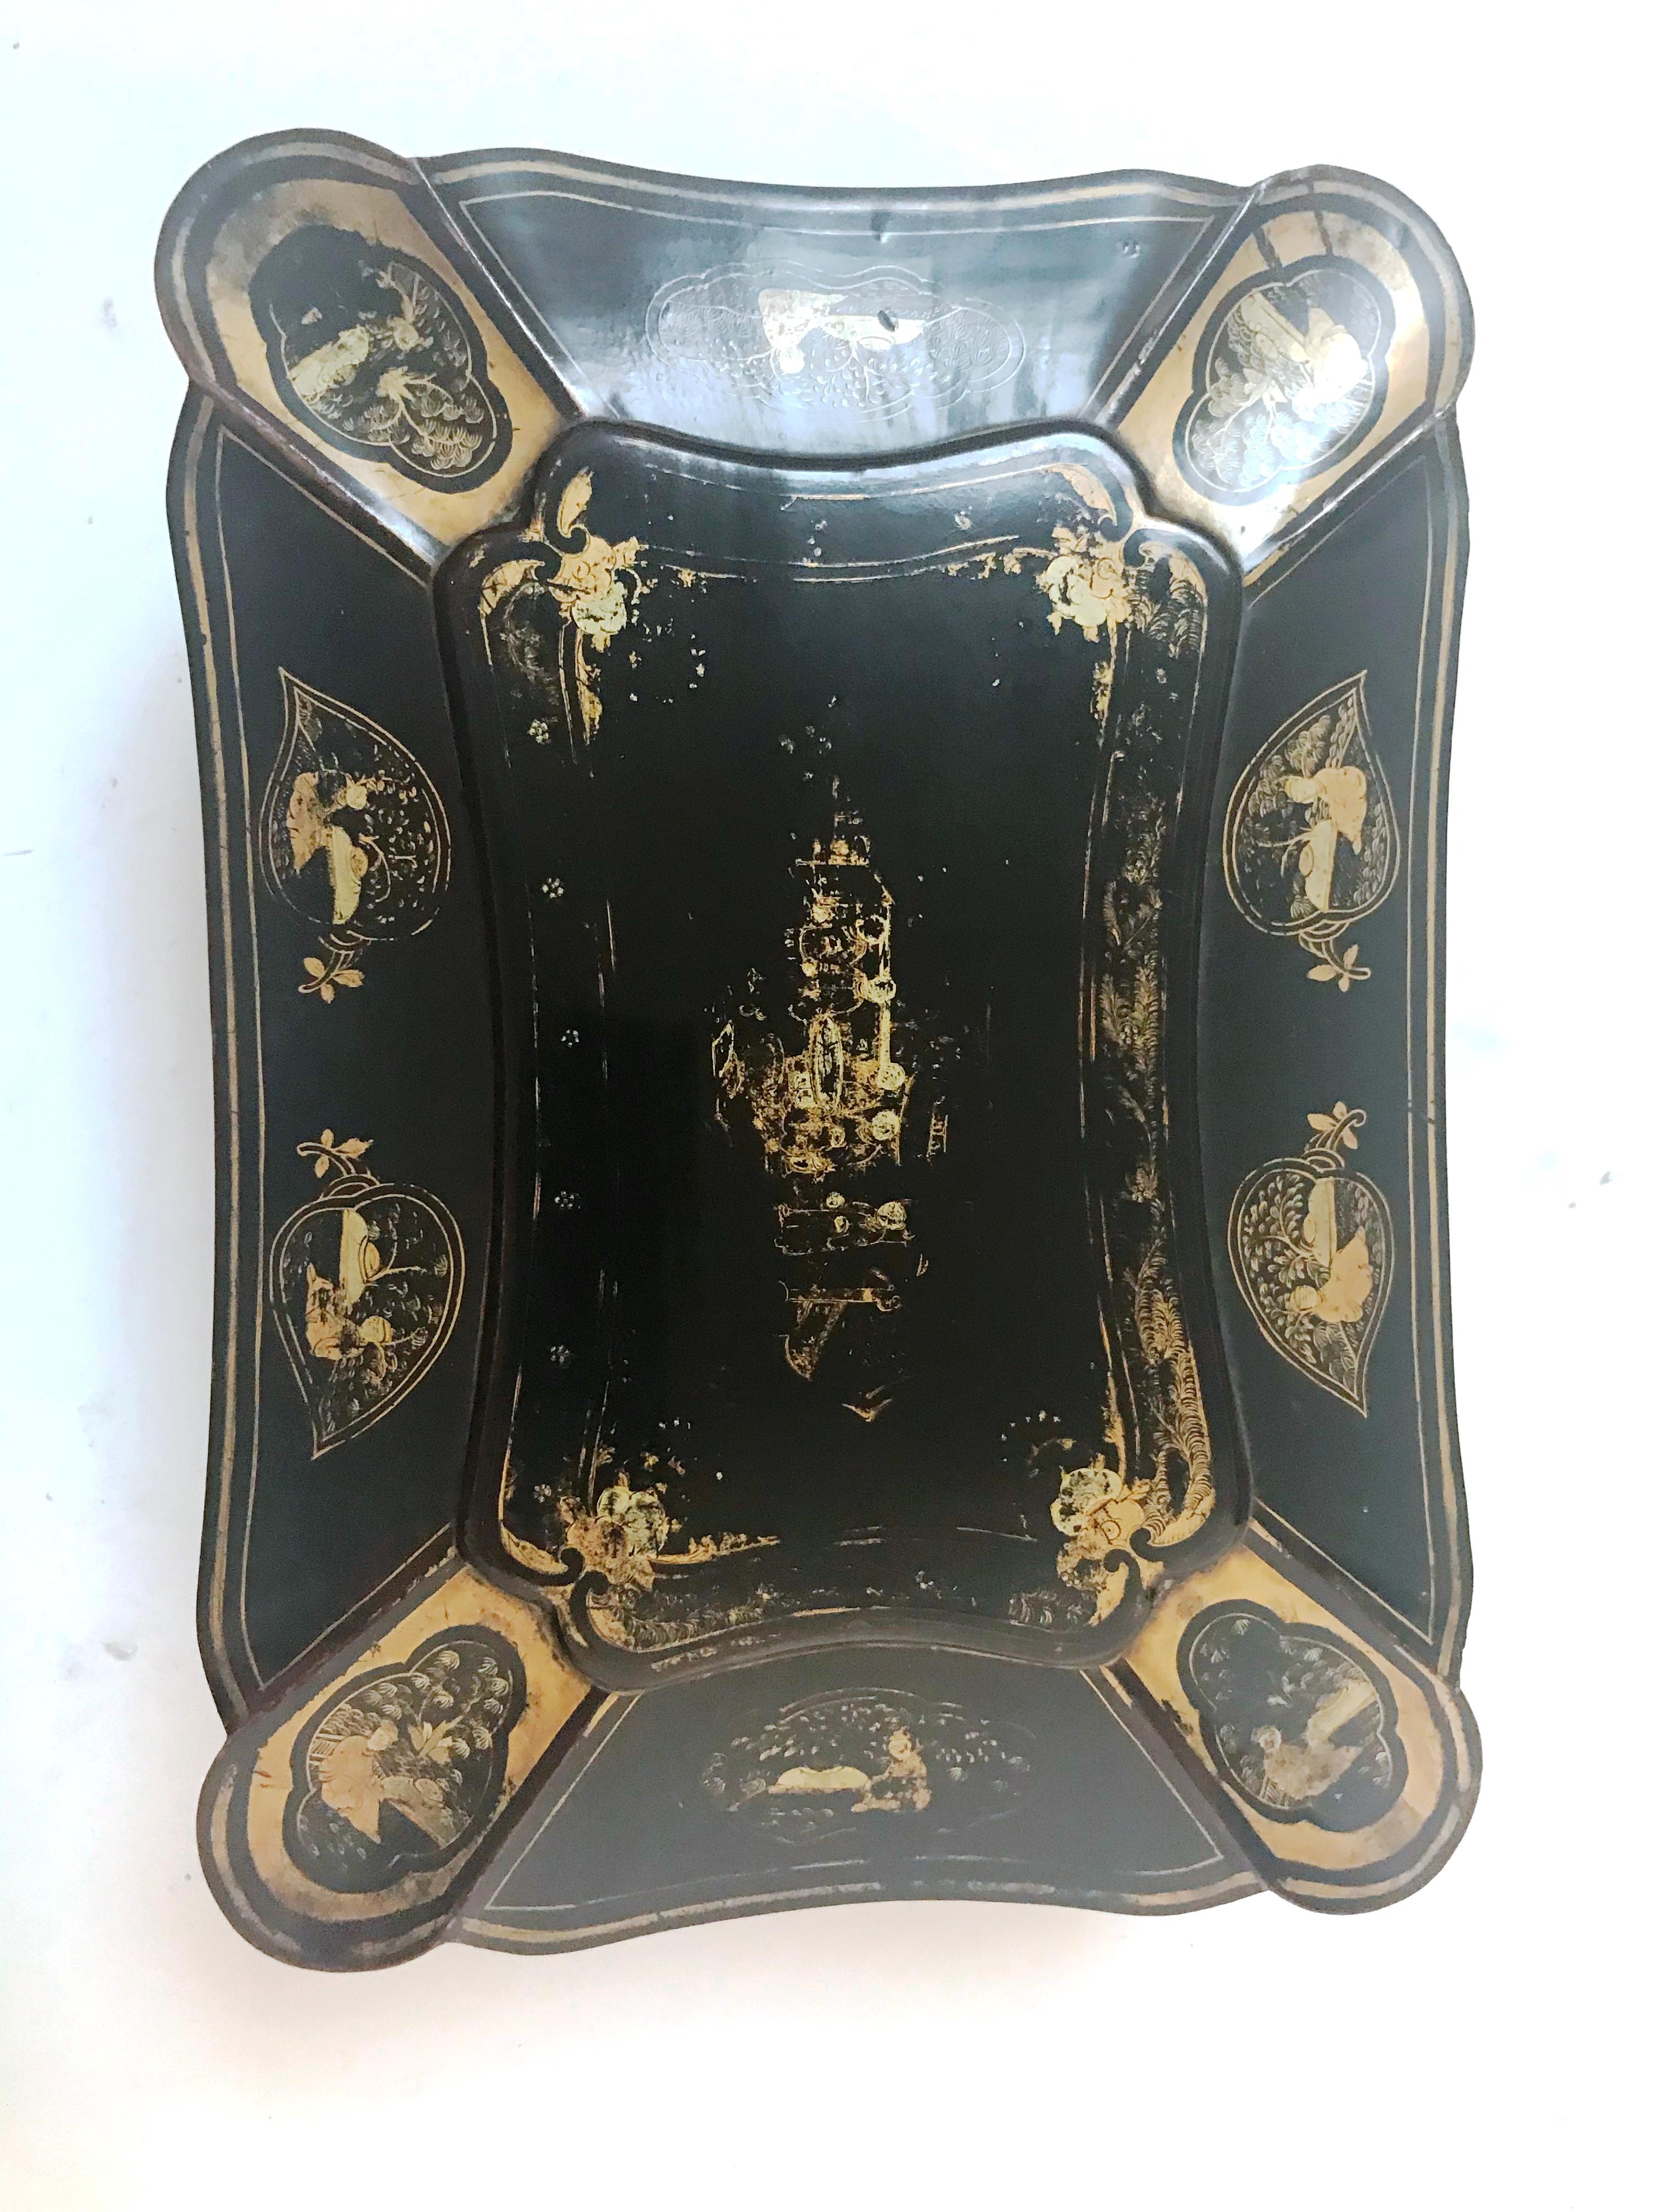 An unusual form Chinese export lacquer and gilt box with lovely decoration.